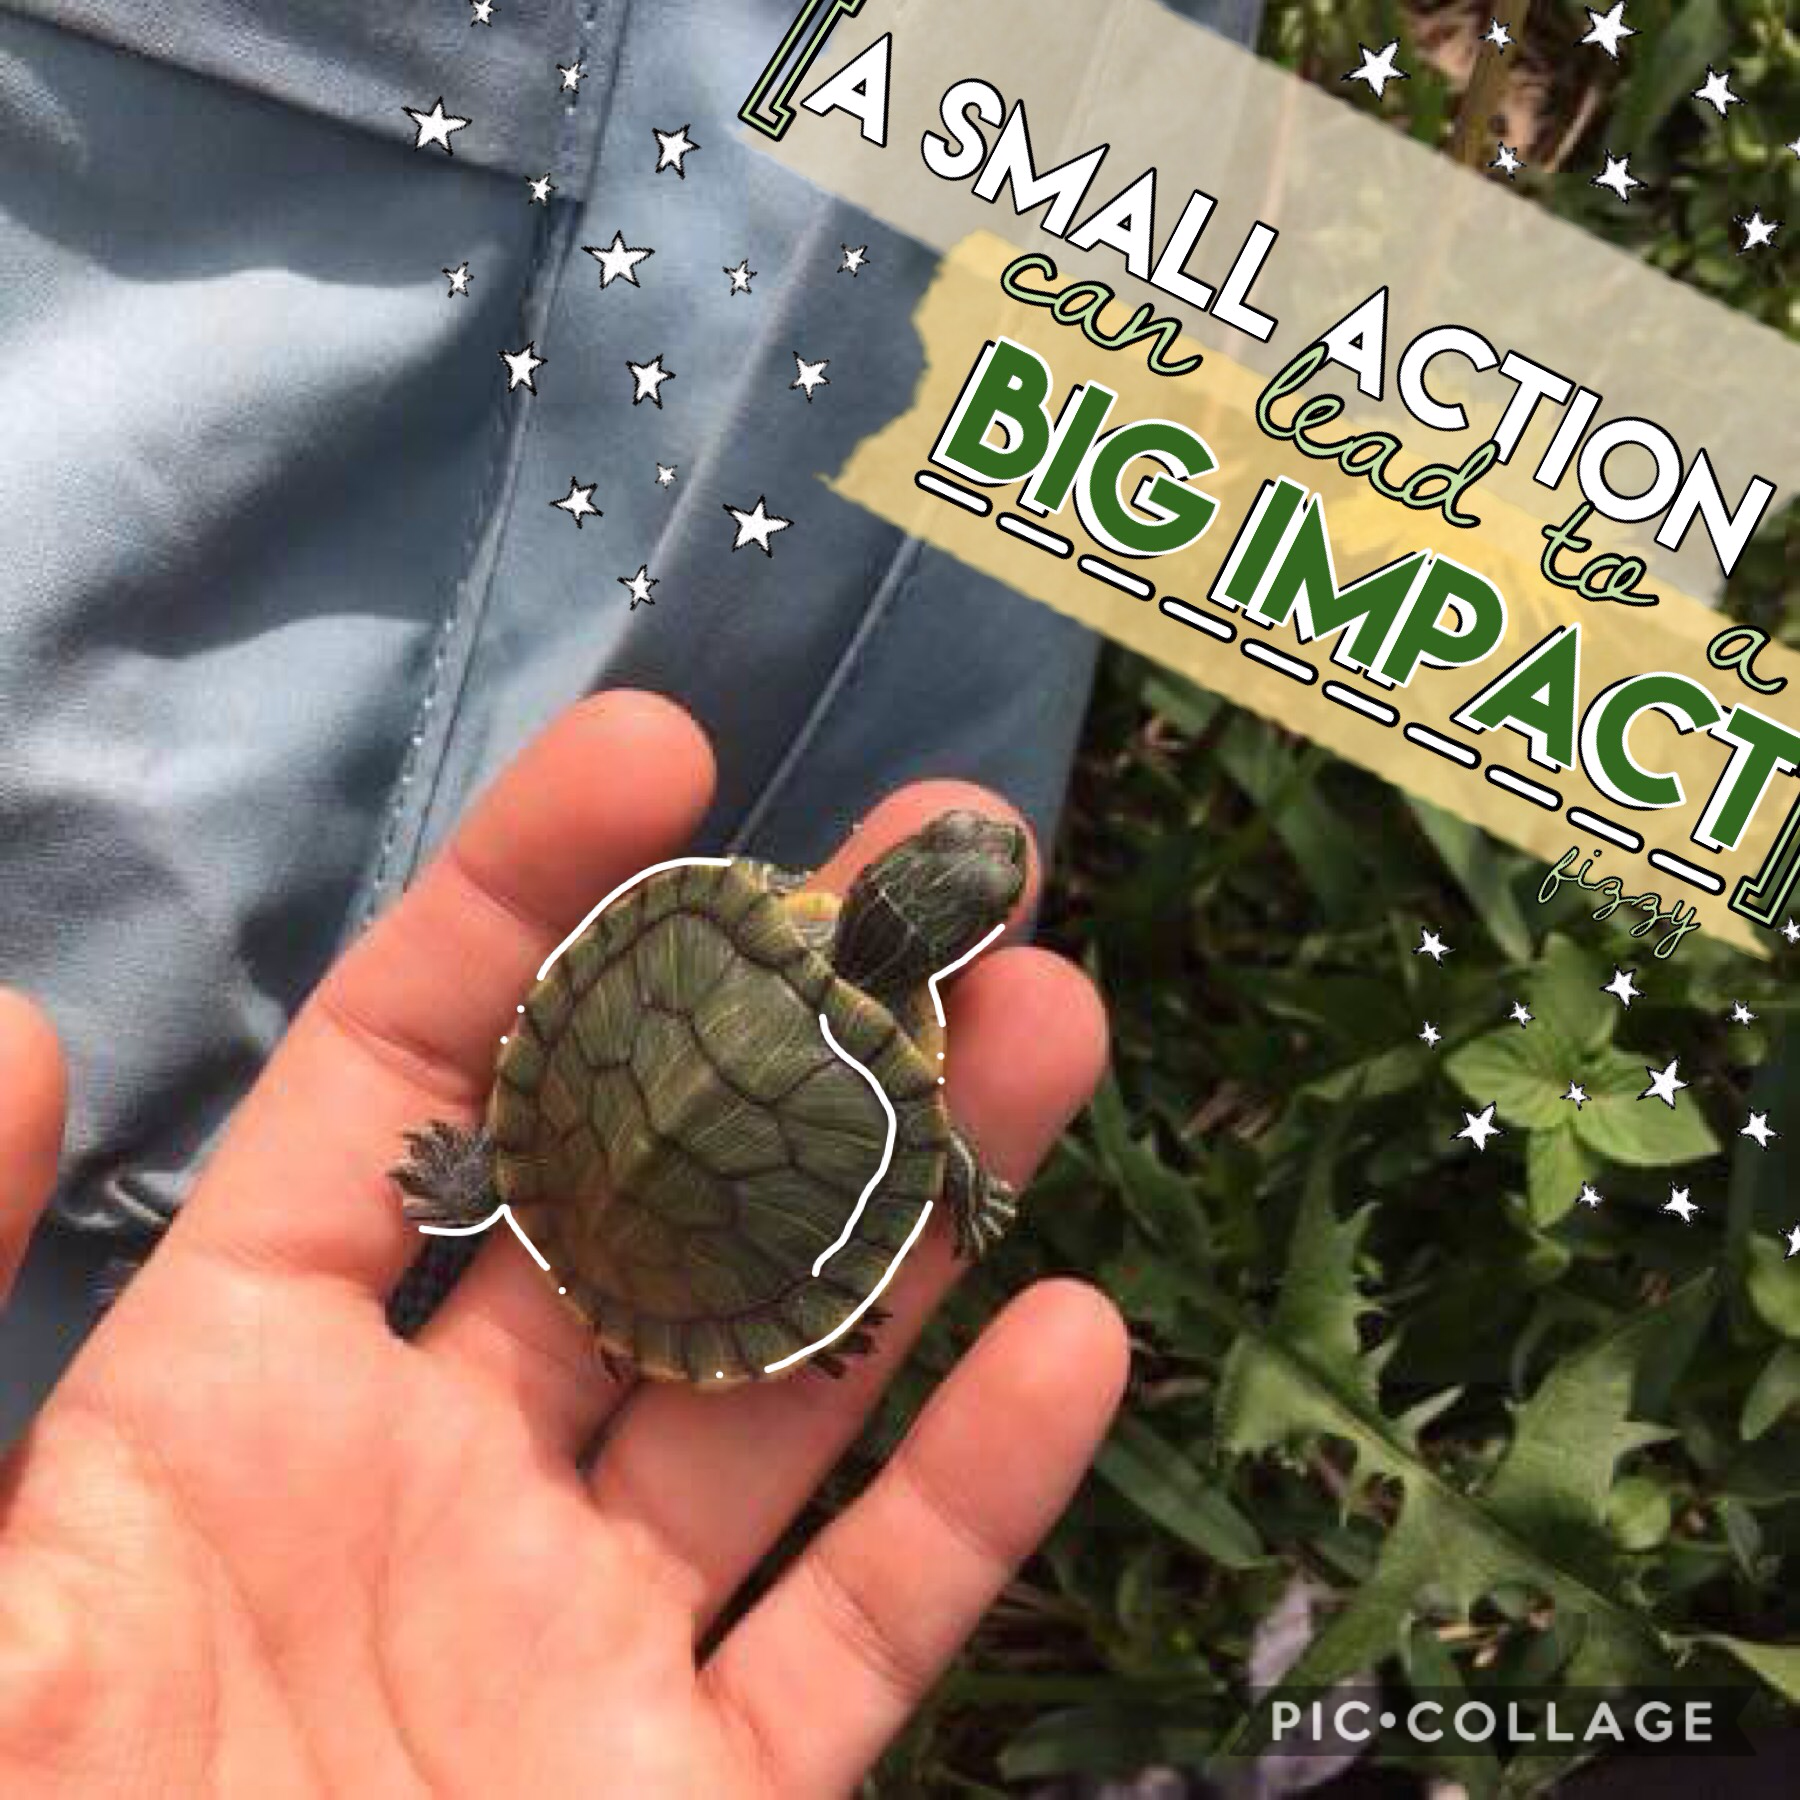 🐢TAP FOR WAYS TO SAVE THE TURTLES🐢
-Use less straws! (Duh)
-Use water bottles!
-Find creative ways to use plastic bags instead of them going to the garbage!